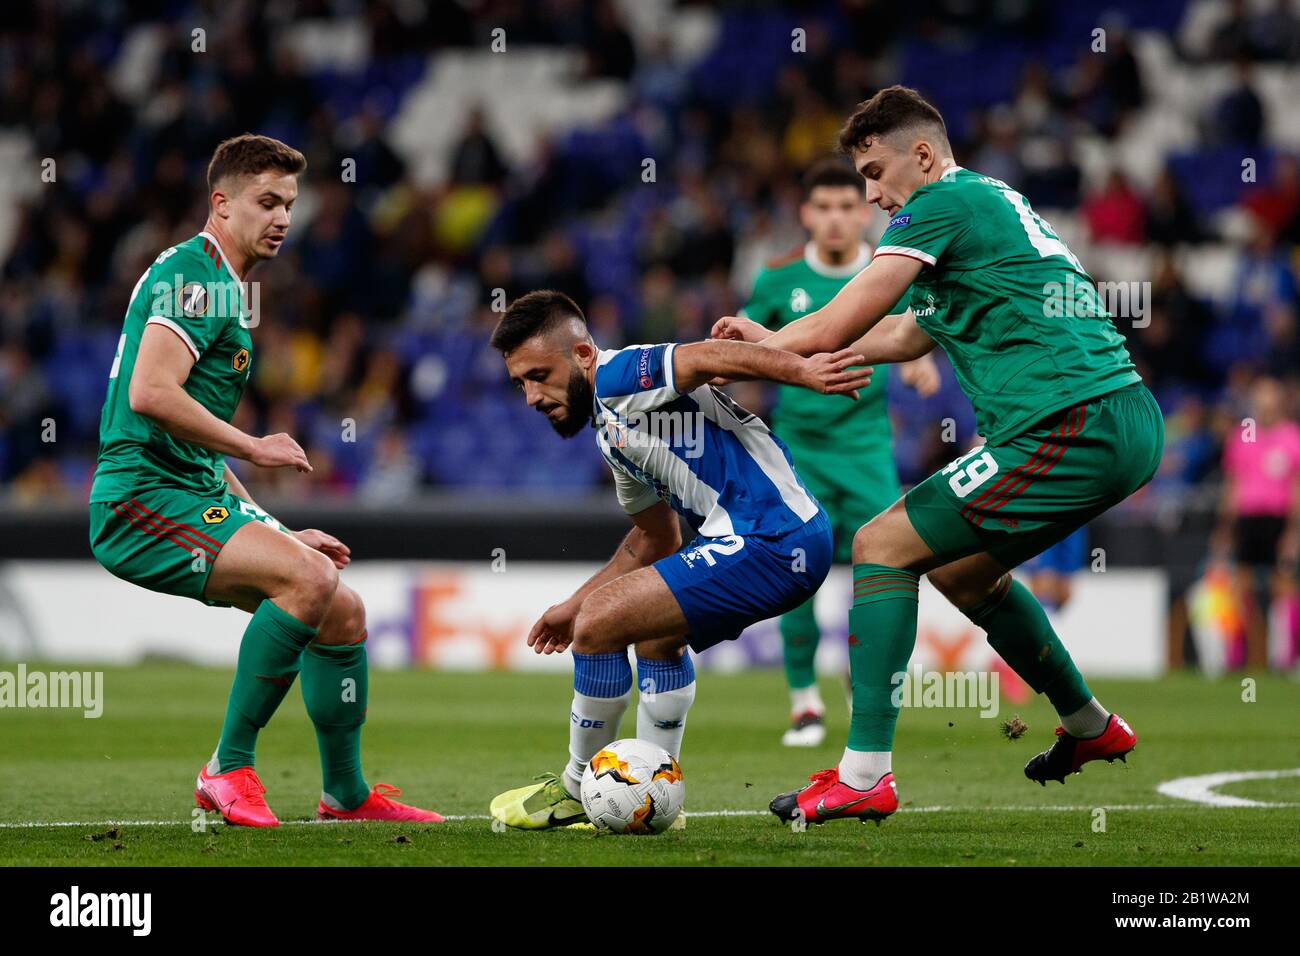 Barcelona, Spain. 27th Feb 2020.  Matias Vargas of RCD Espanyol in action with Max Kilman and Leander Dendoncker of Wolverhampton Wanderers F.C. during the UEFA Europa League round of 32 second leg match between RCD Espanyol and Wolverhampton Wanderers at RCD Stadium on February 27, 2020 in Barcelona, Spain. Credit: Dax Images/Alamy Live News Stock Photo